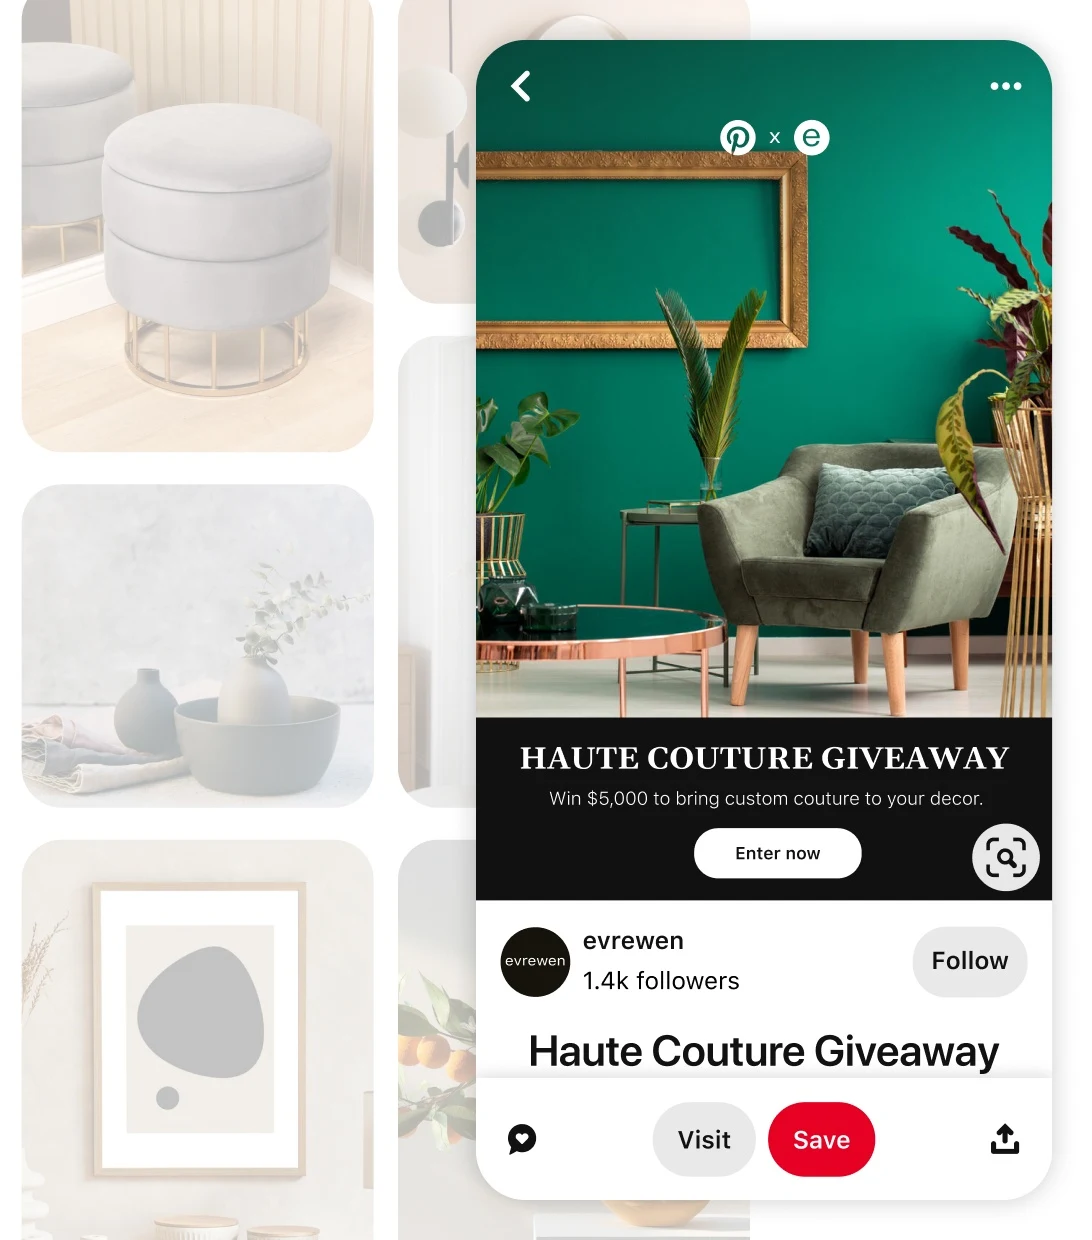 Faded interior design Pin grid with "Haute Couture Giveaway" Pin in front